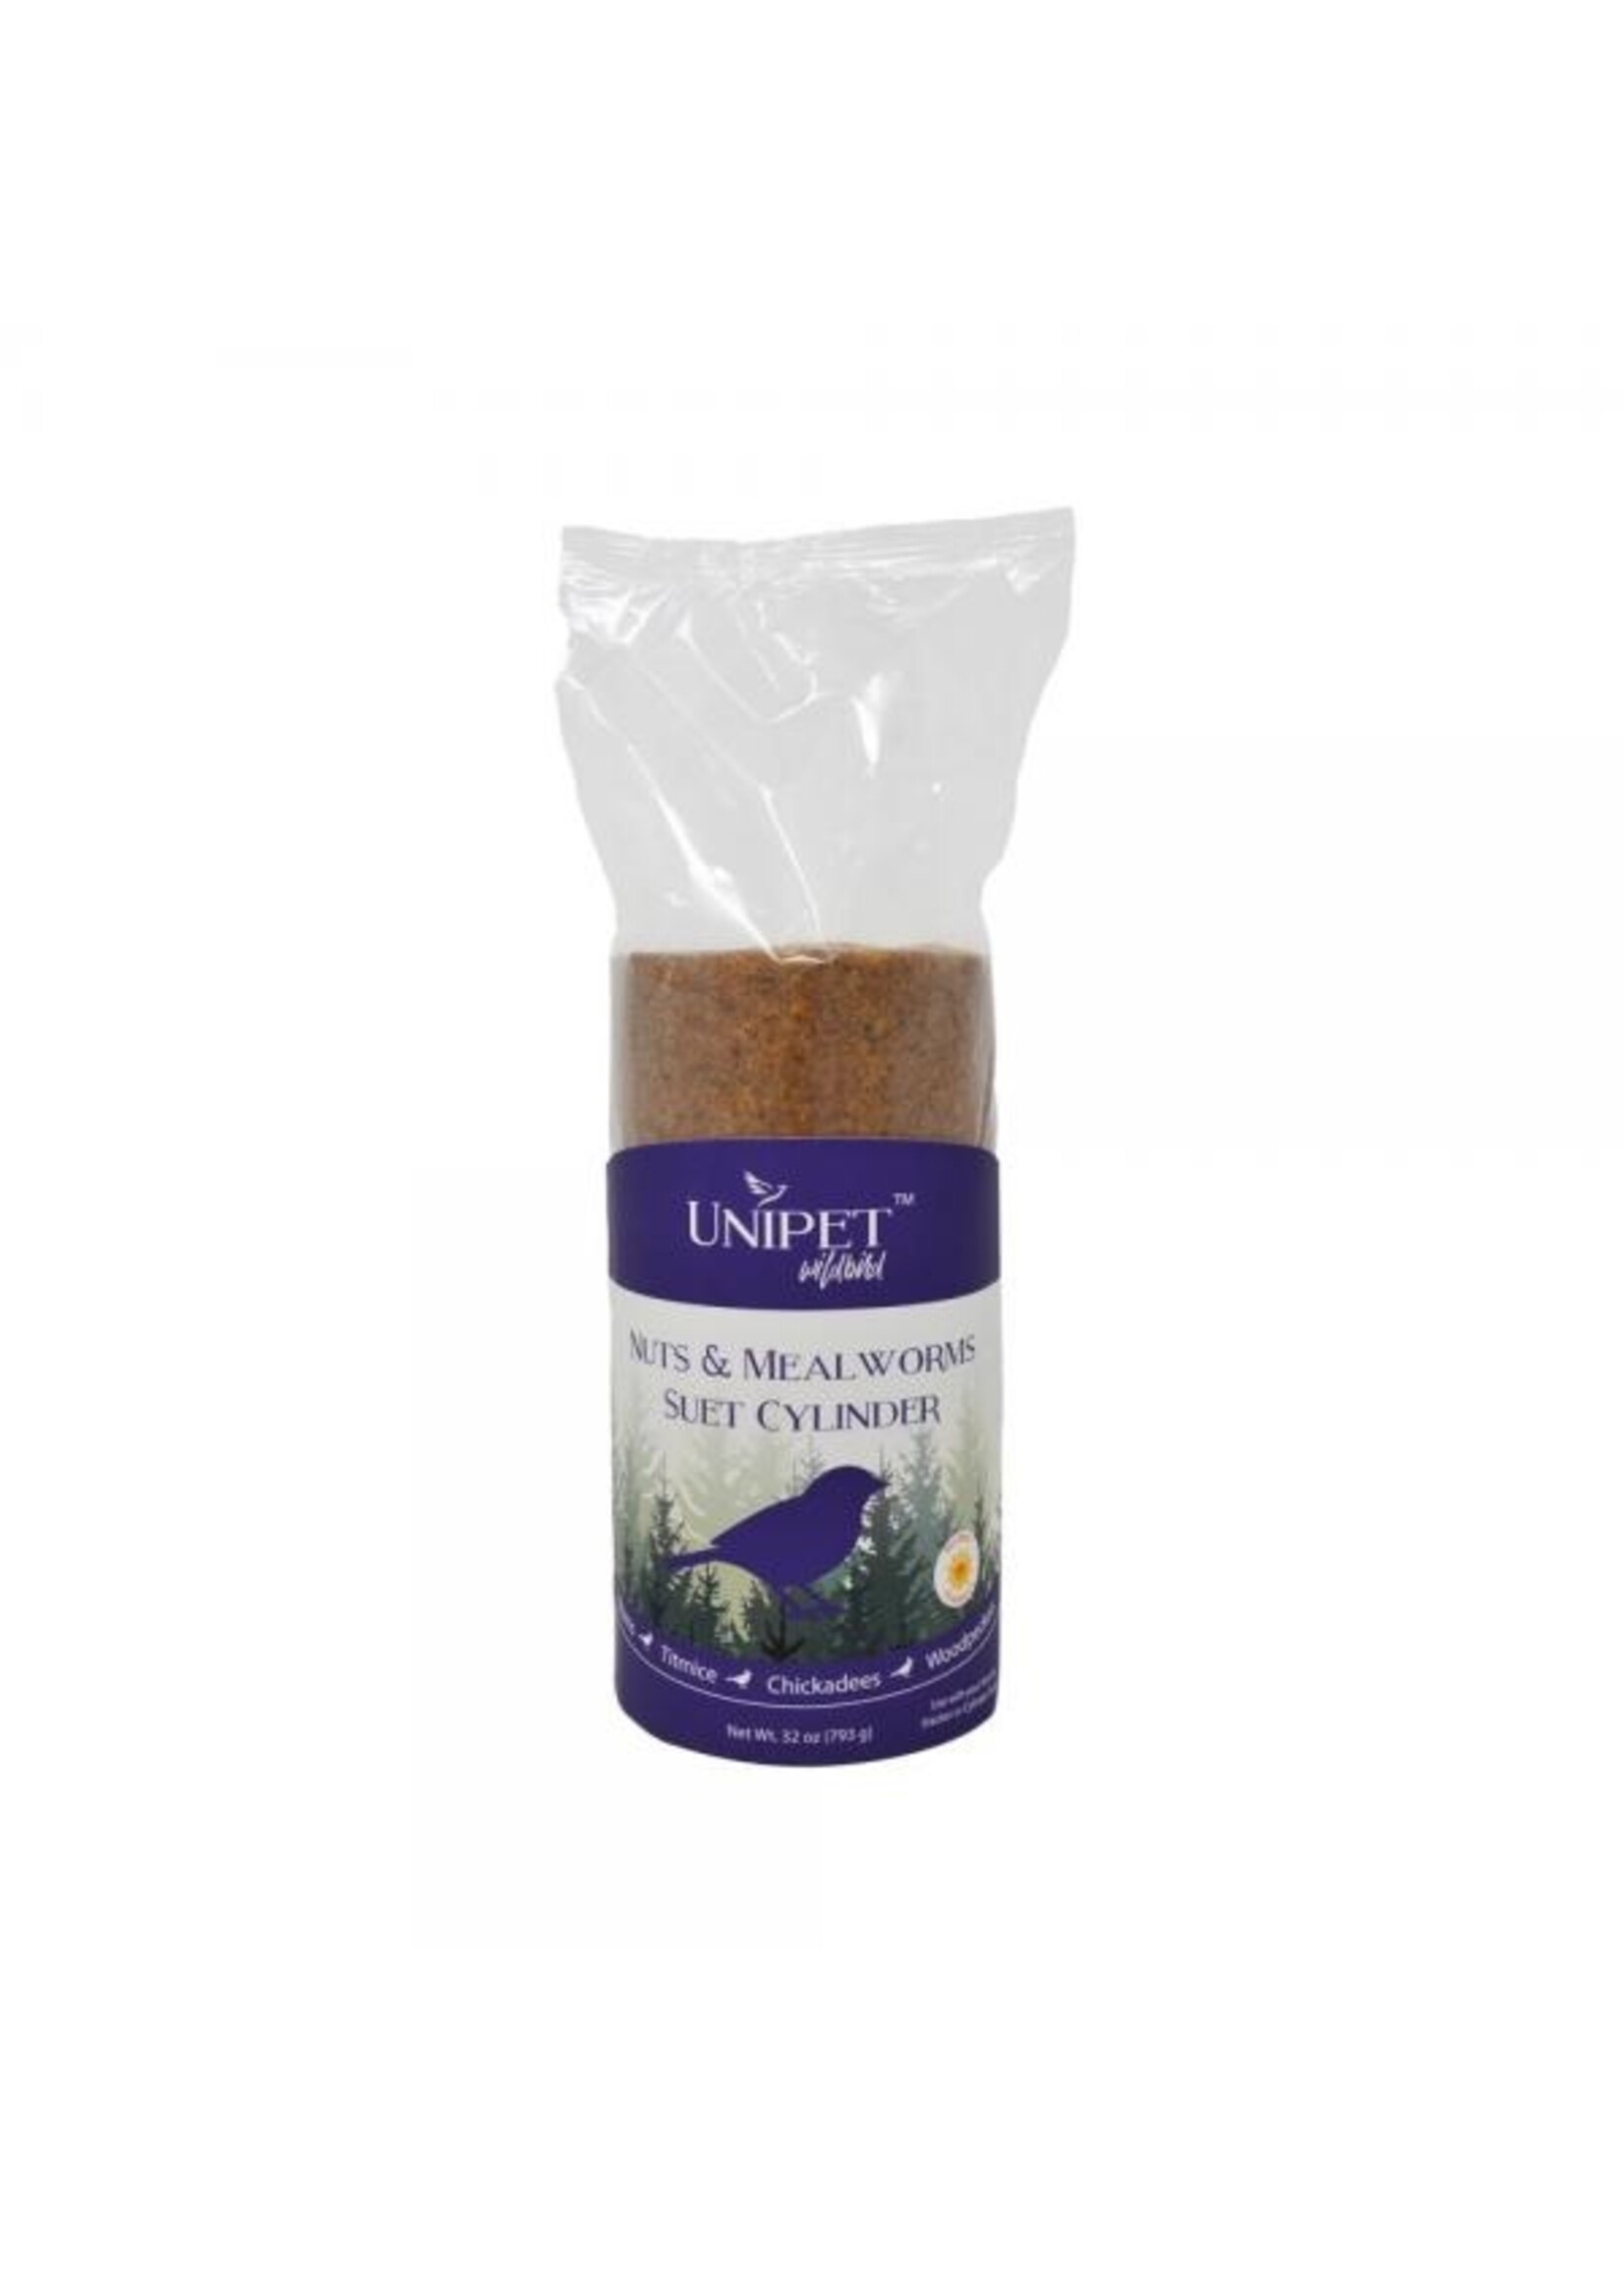 UNIPET Nuts & Mealworms Suet Cylinder